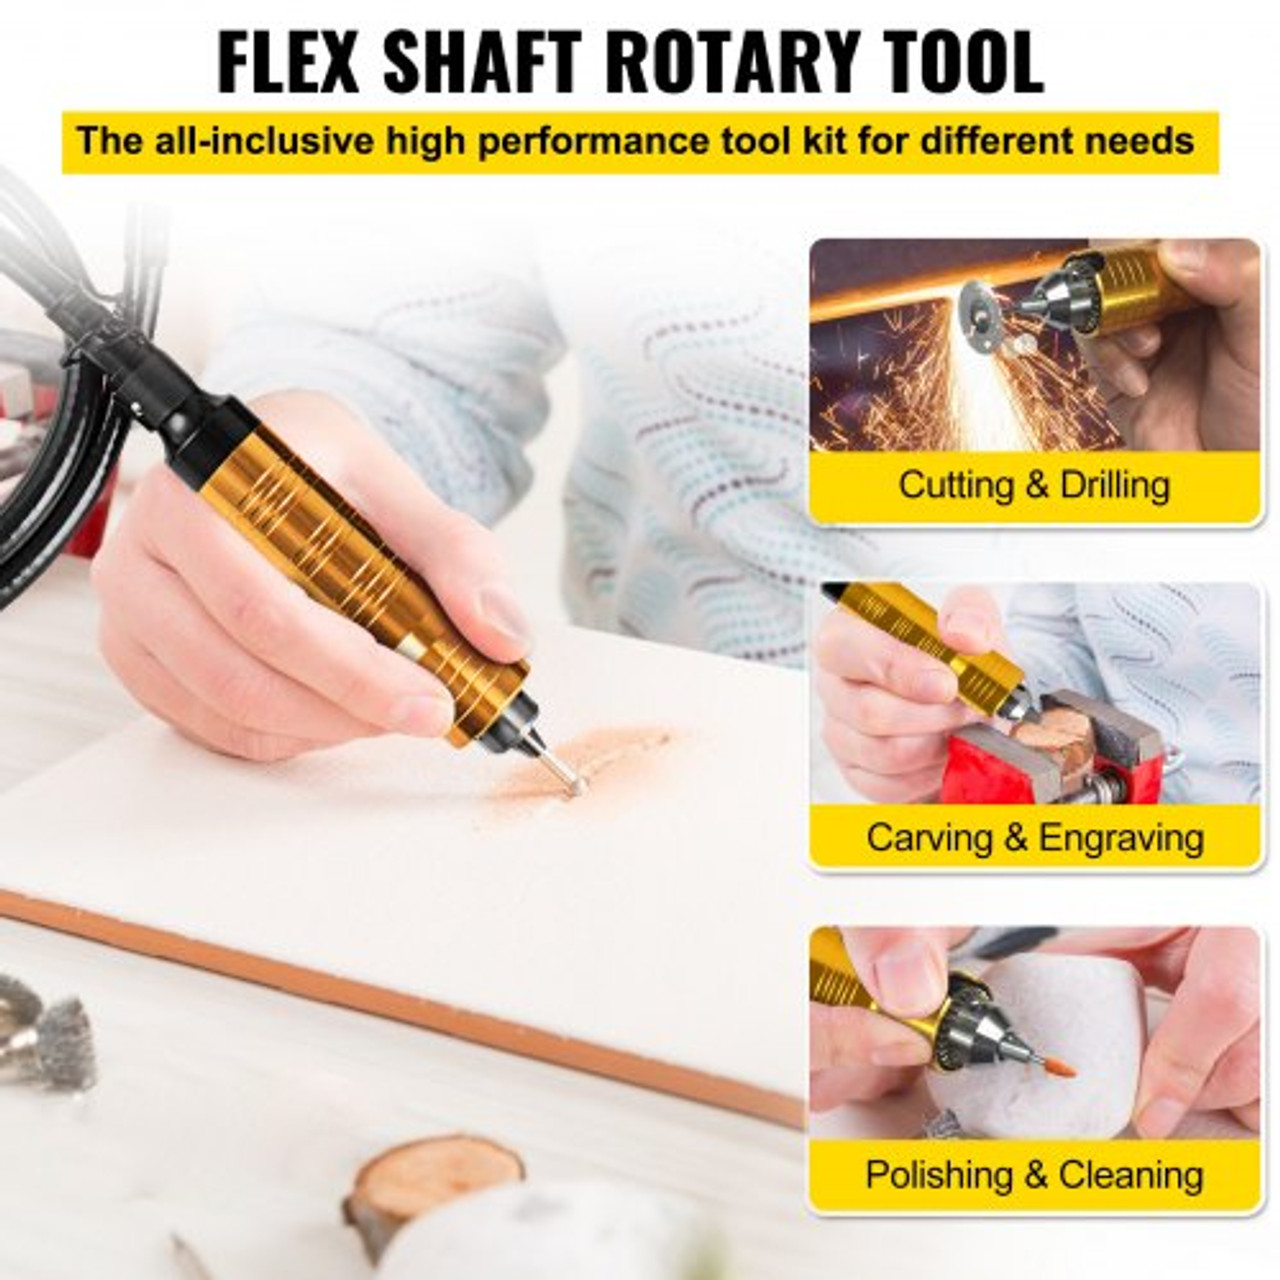 S-R Hanging Flex Shaft Grinder 230W Rotary Tool with Stepless Speed Foot Pedal Rotary Carver 0-180000rmp for Carving, Buffing,Drilling,Polishing (6mm flexshaft)